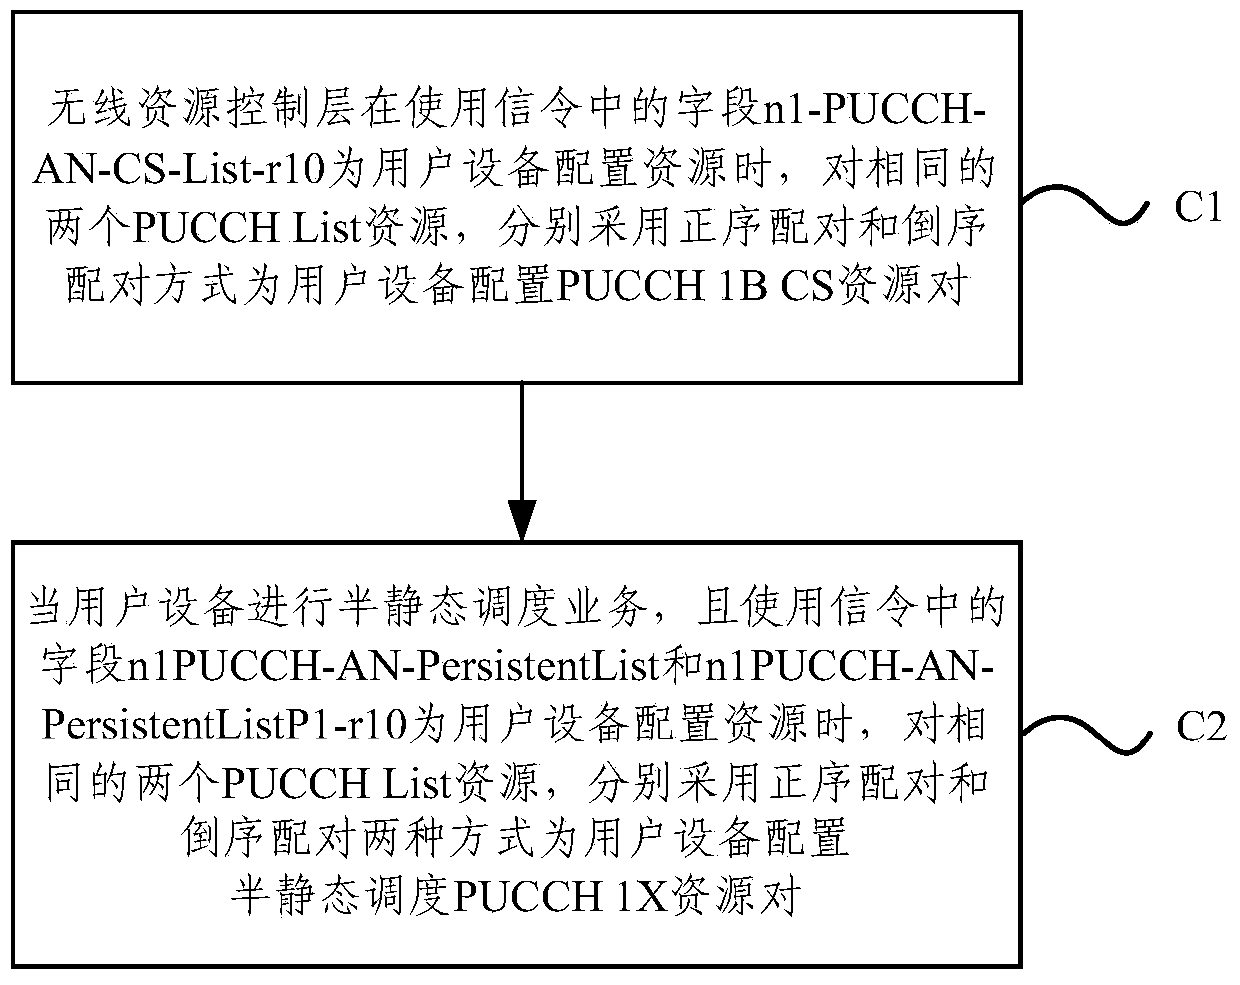 A PUCCH resource allocation method in LTE-A